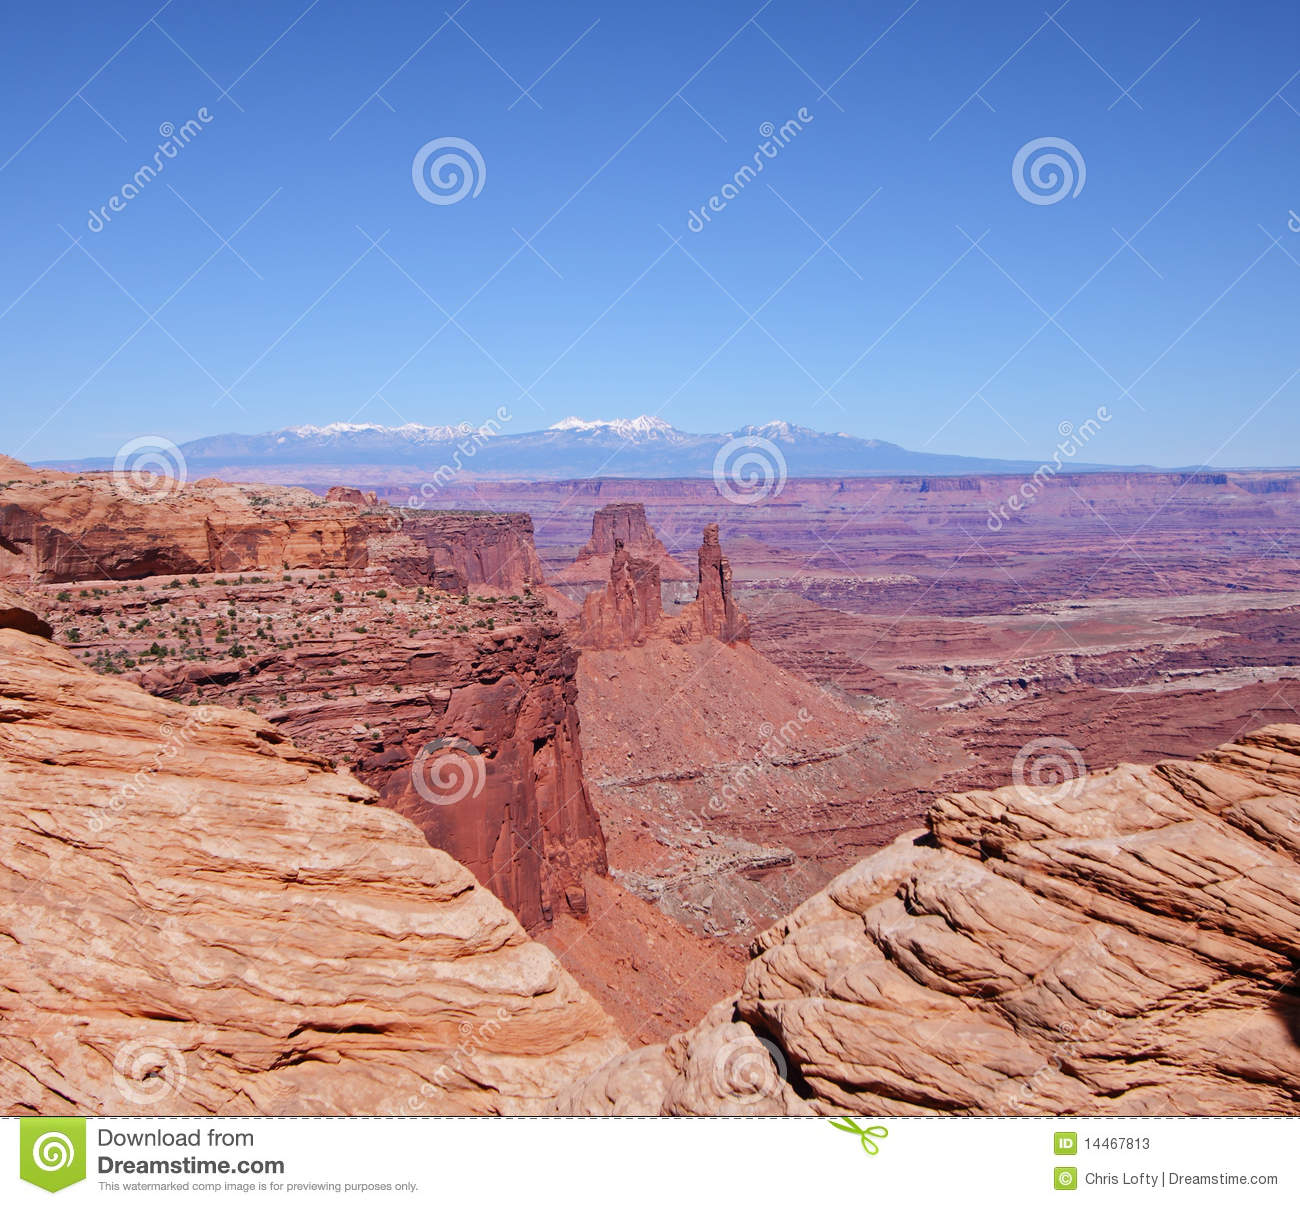 Canyon Landscape In The Usa Stock Photos   Image  14467813